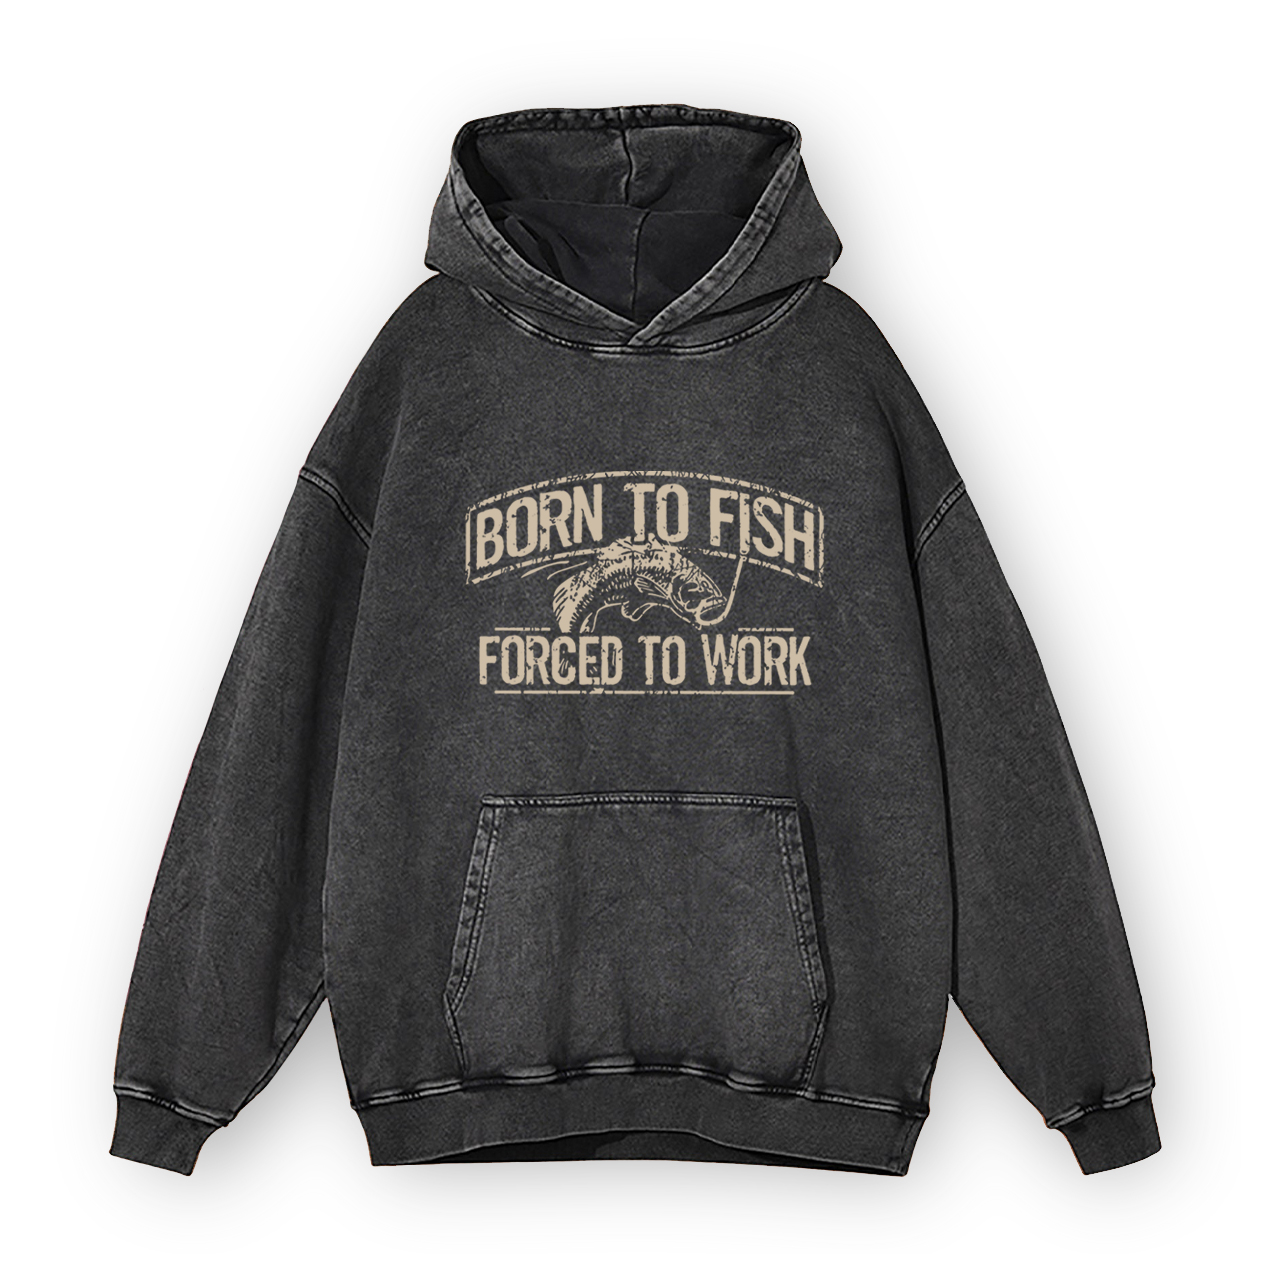 Born To Fish Forced To Work Garment-Dye Hoodies